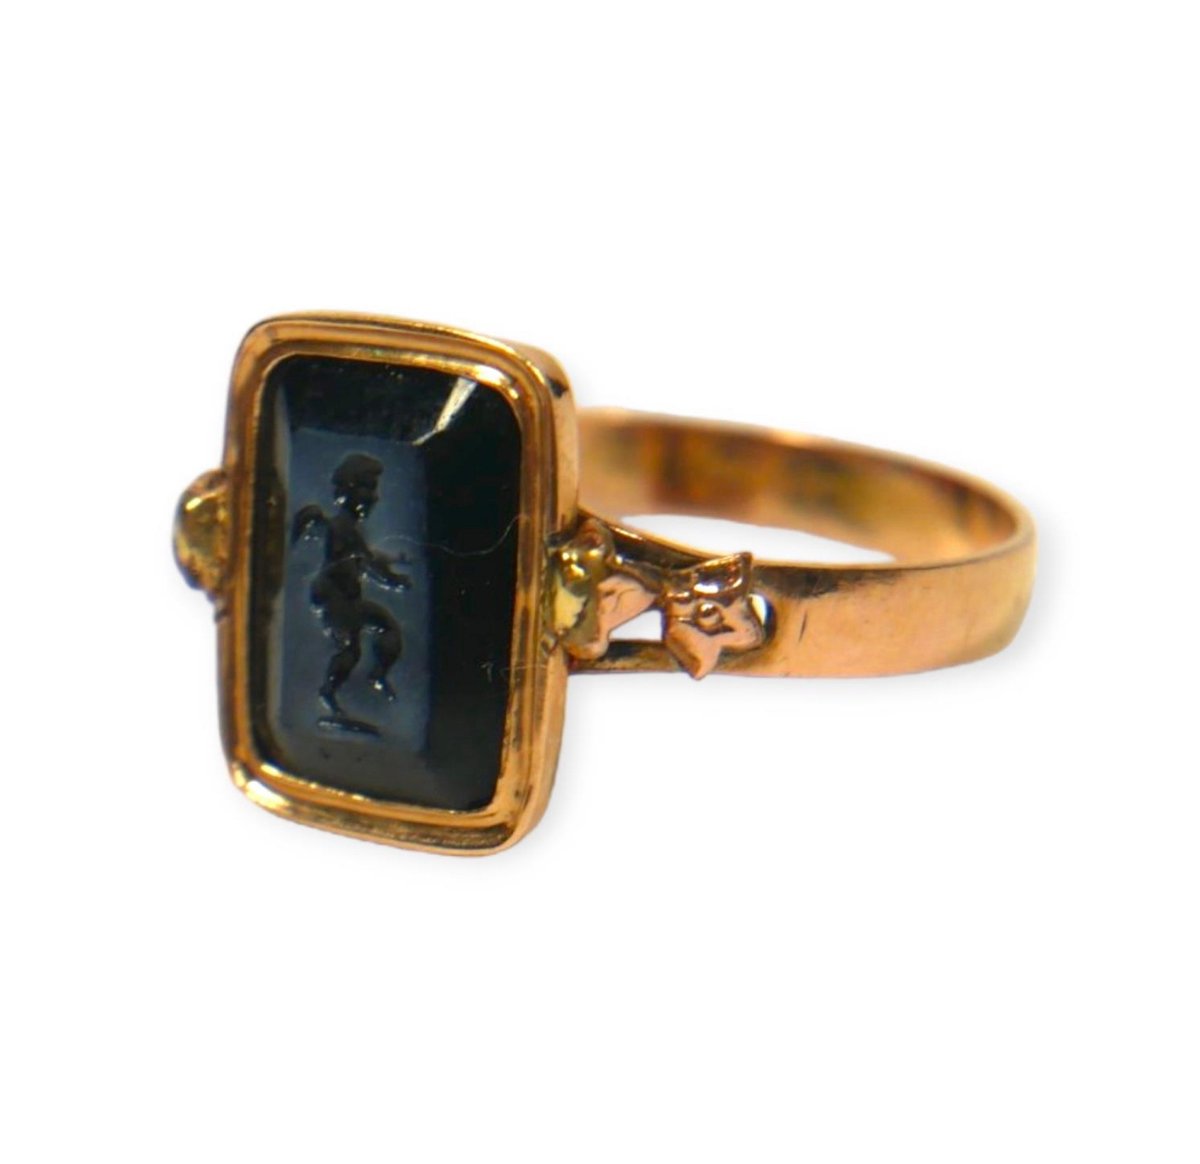 lot 6: 
A 19TH CENTURY FRENCH 14CT GOLD CARVED BLACK CHALCEDONY NICOLO INTAGLIO RING

Sale date: 3rd October at 12noon

#french #chalcedony #chalcedonystone #chalcedonyring #nicolo #chalcedonyjewelry #eros #cupid #cupidlove #intaglio #intaglioring #ring #ringoftheday #ringring